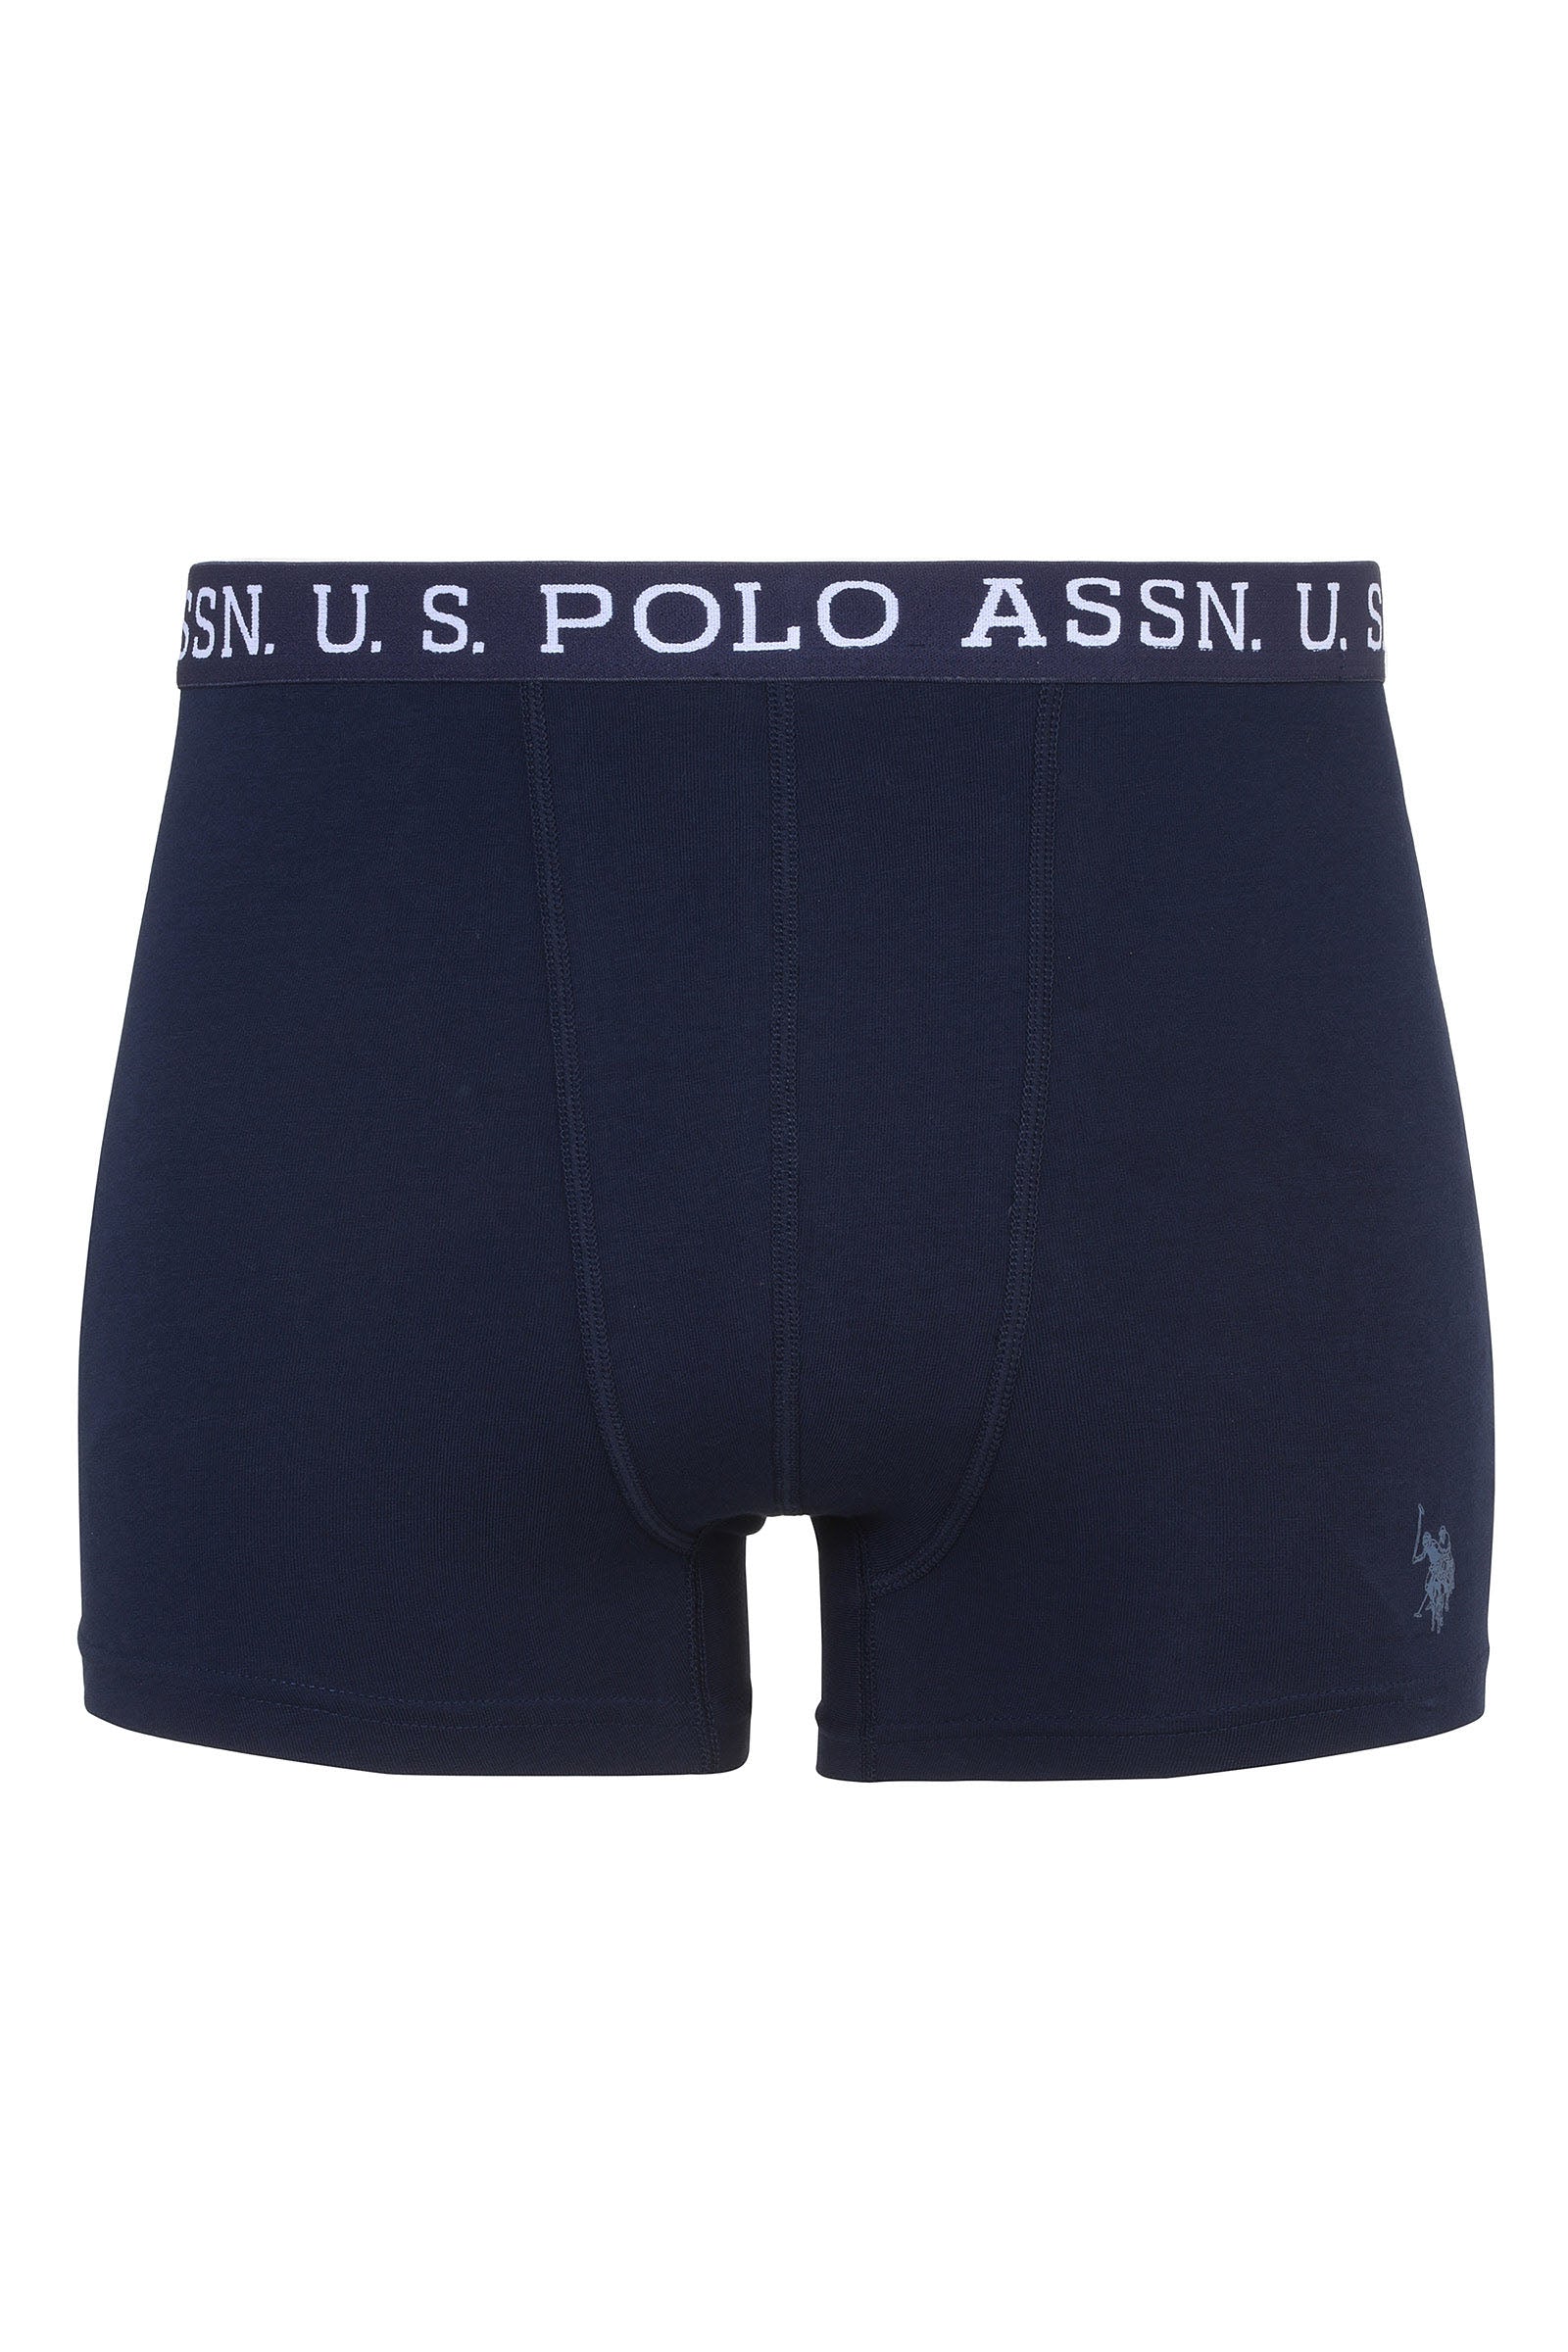 Mens 3 Pack Boxer Shorts in Navy Blue